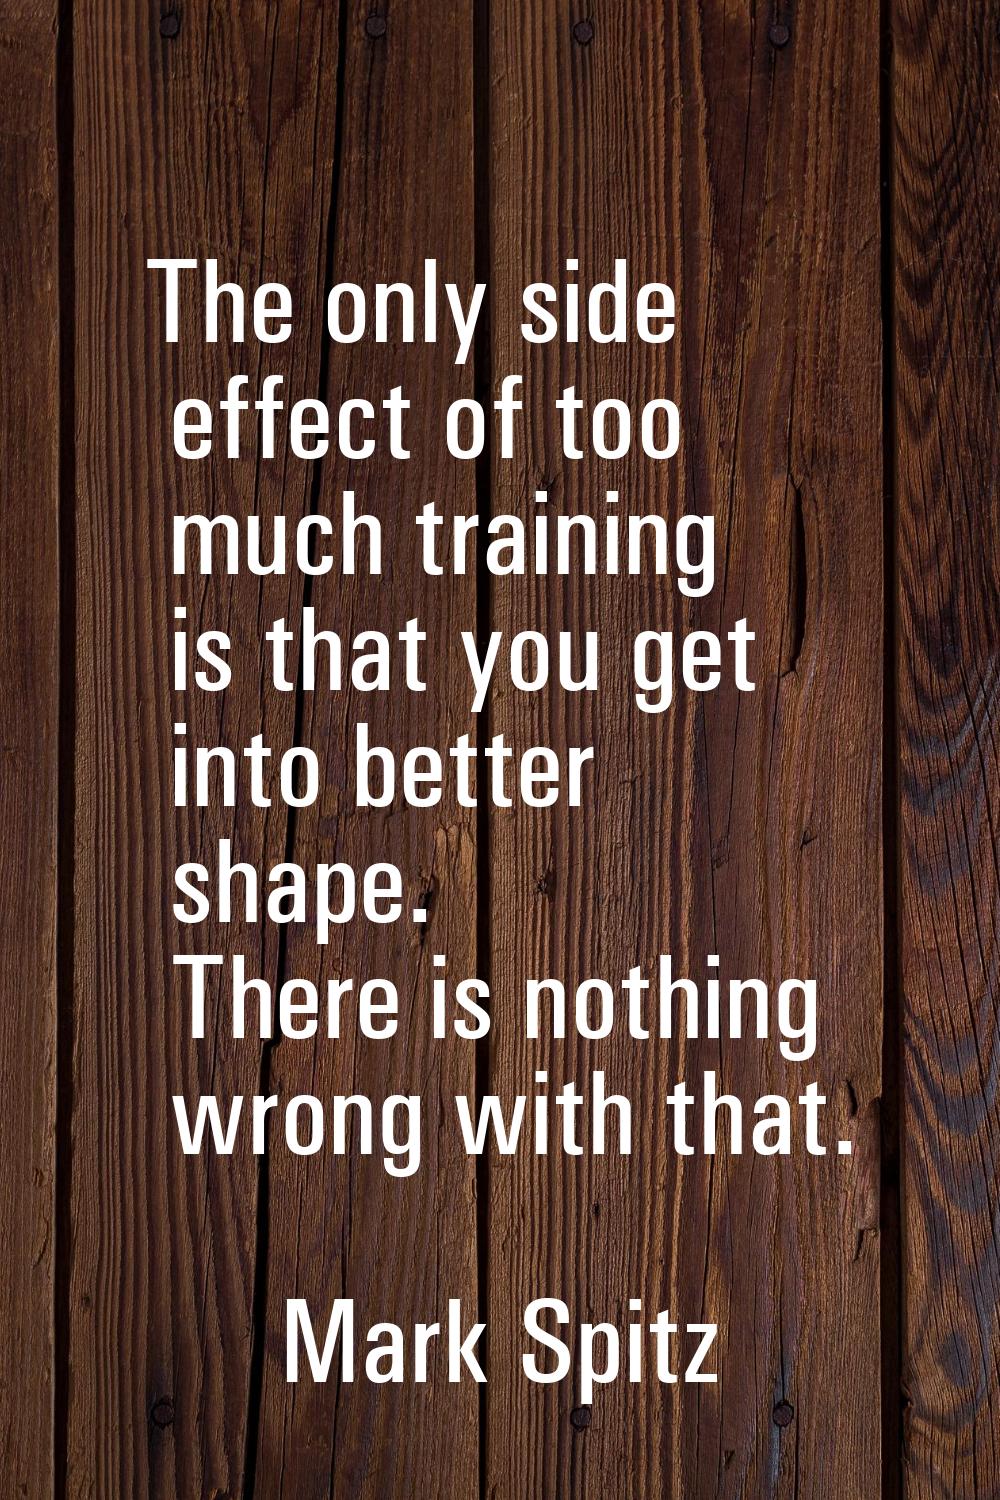 The only side effect of too much training is that you get into better shape. There is nothing wrong